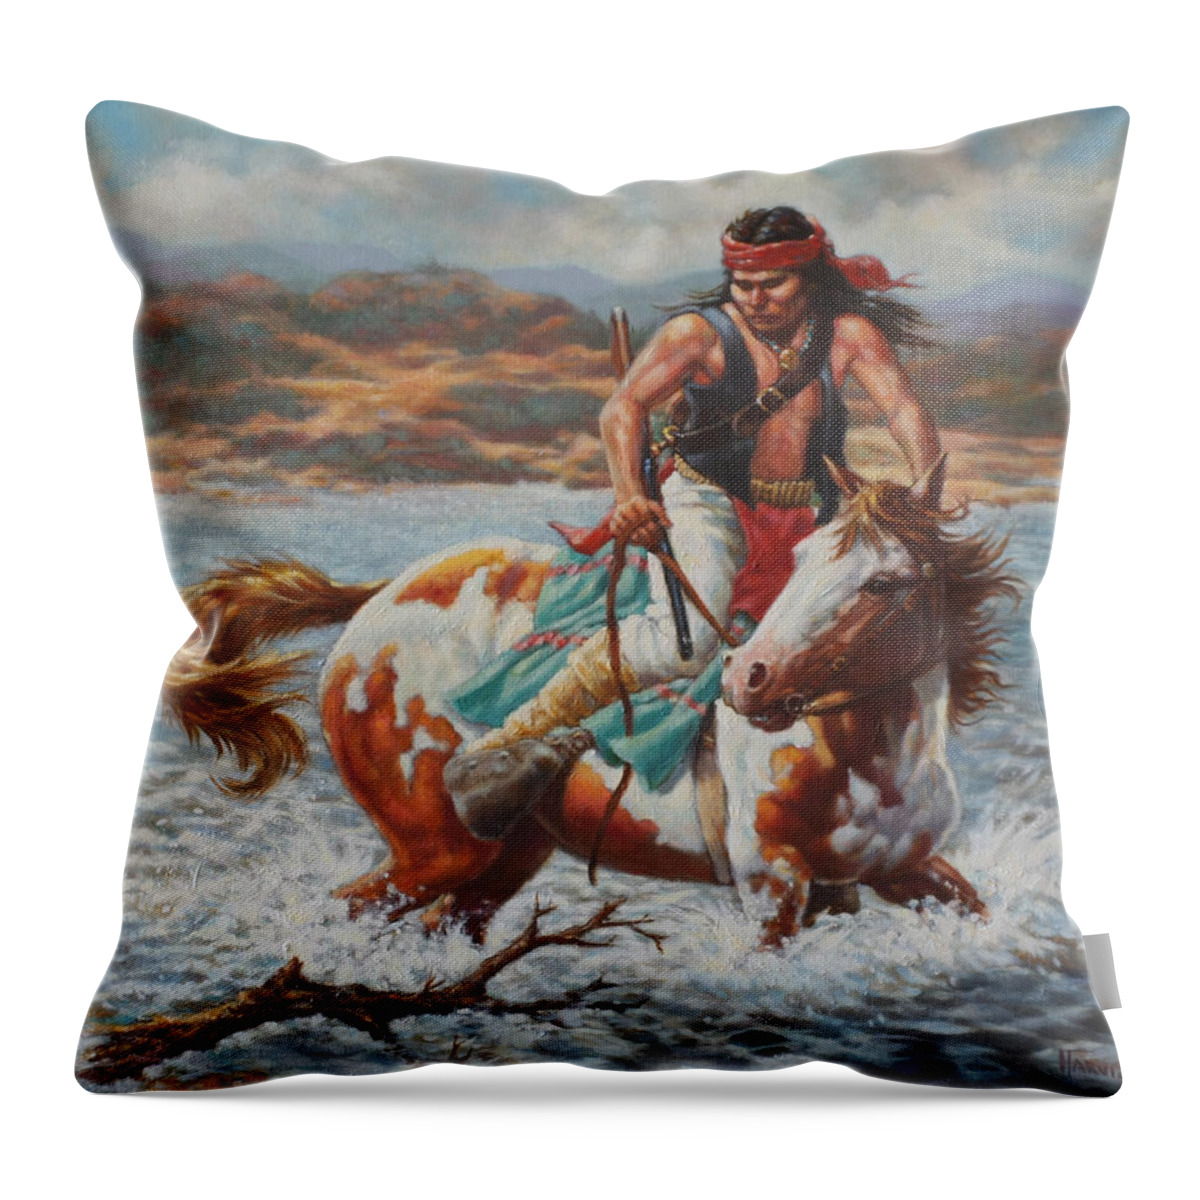 Native American Throw Pillow featuring the painting River Crossing by Harvie Brown